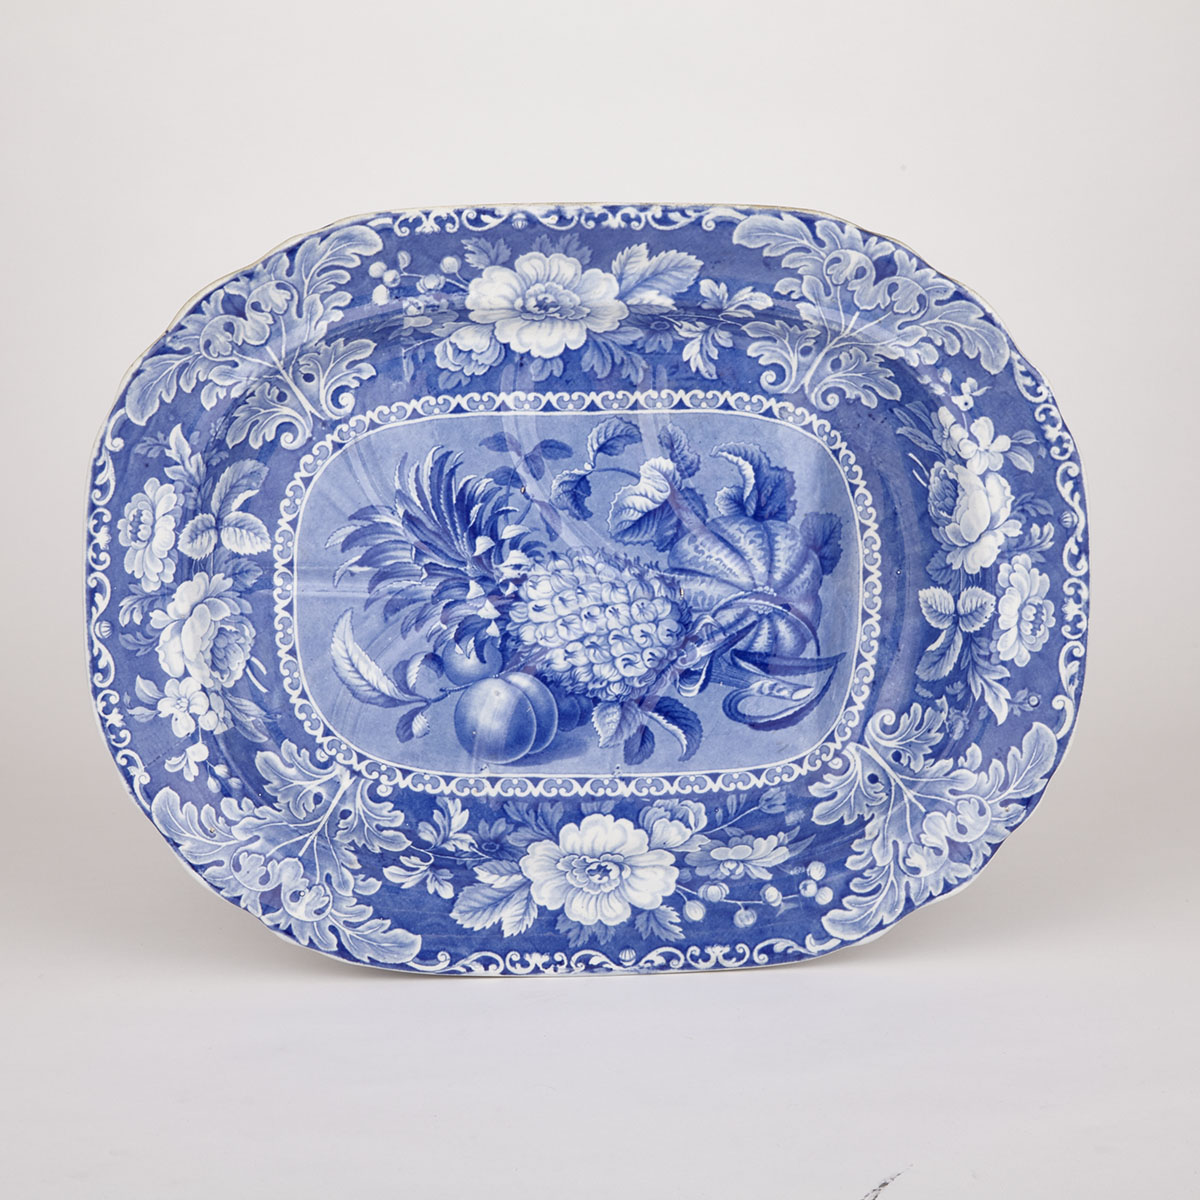 Staffordshire Blue-Printed Well-and-Tree Platter, c.1830